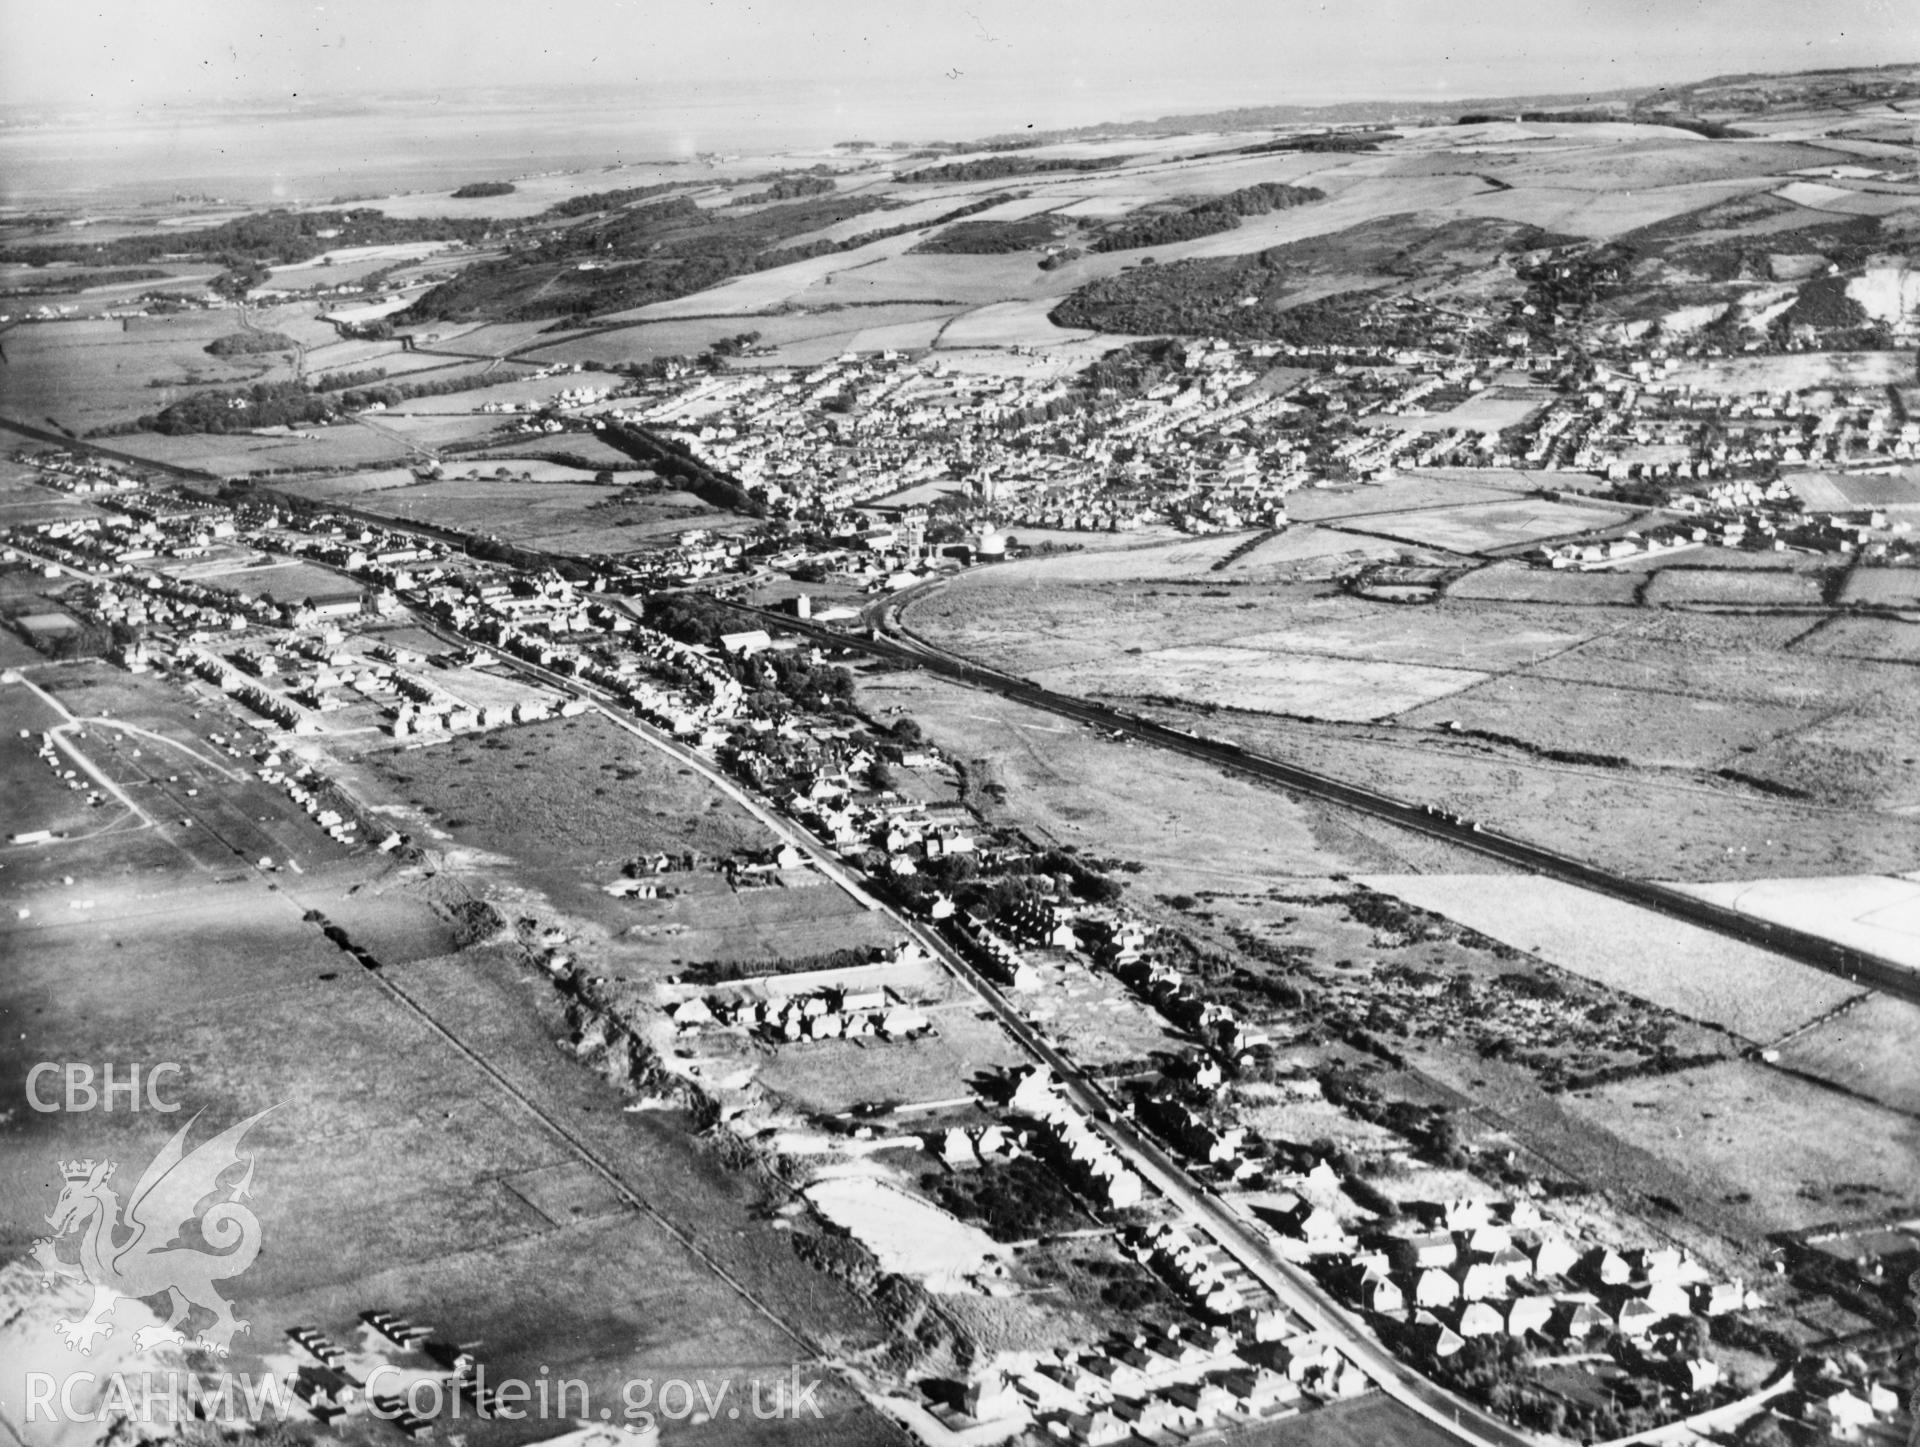 General view of Towyn Isaf and Prestatyn looking east. Oblique aerial photograph, 5?x4? BW glass plate.